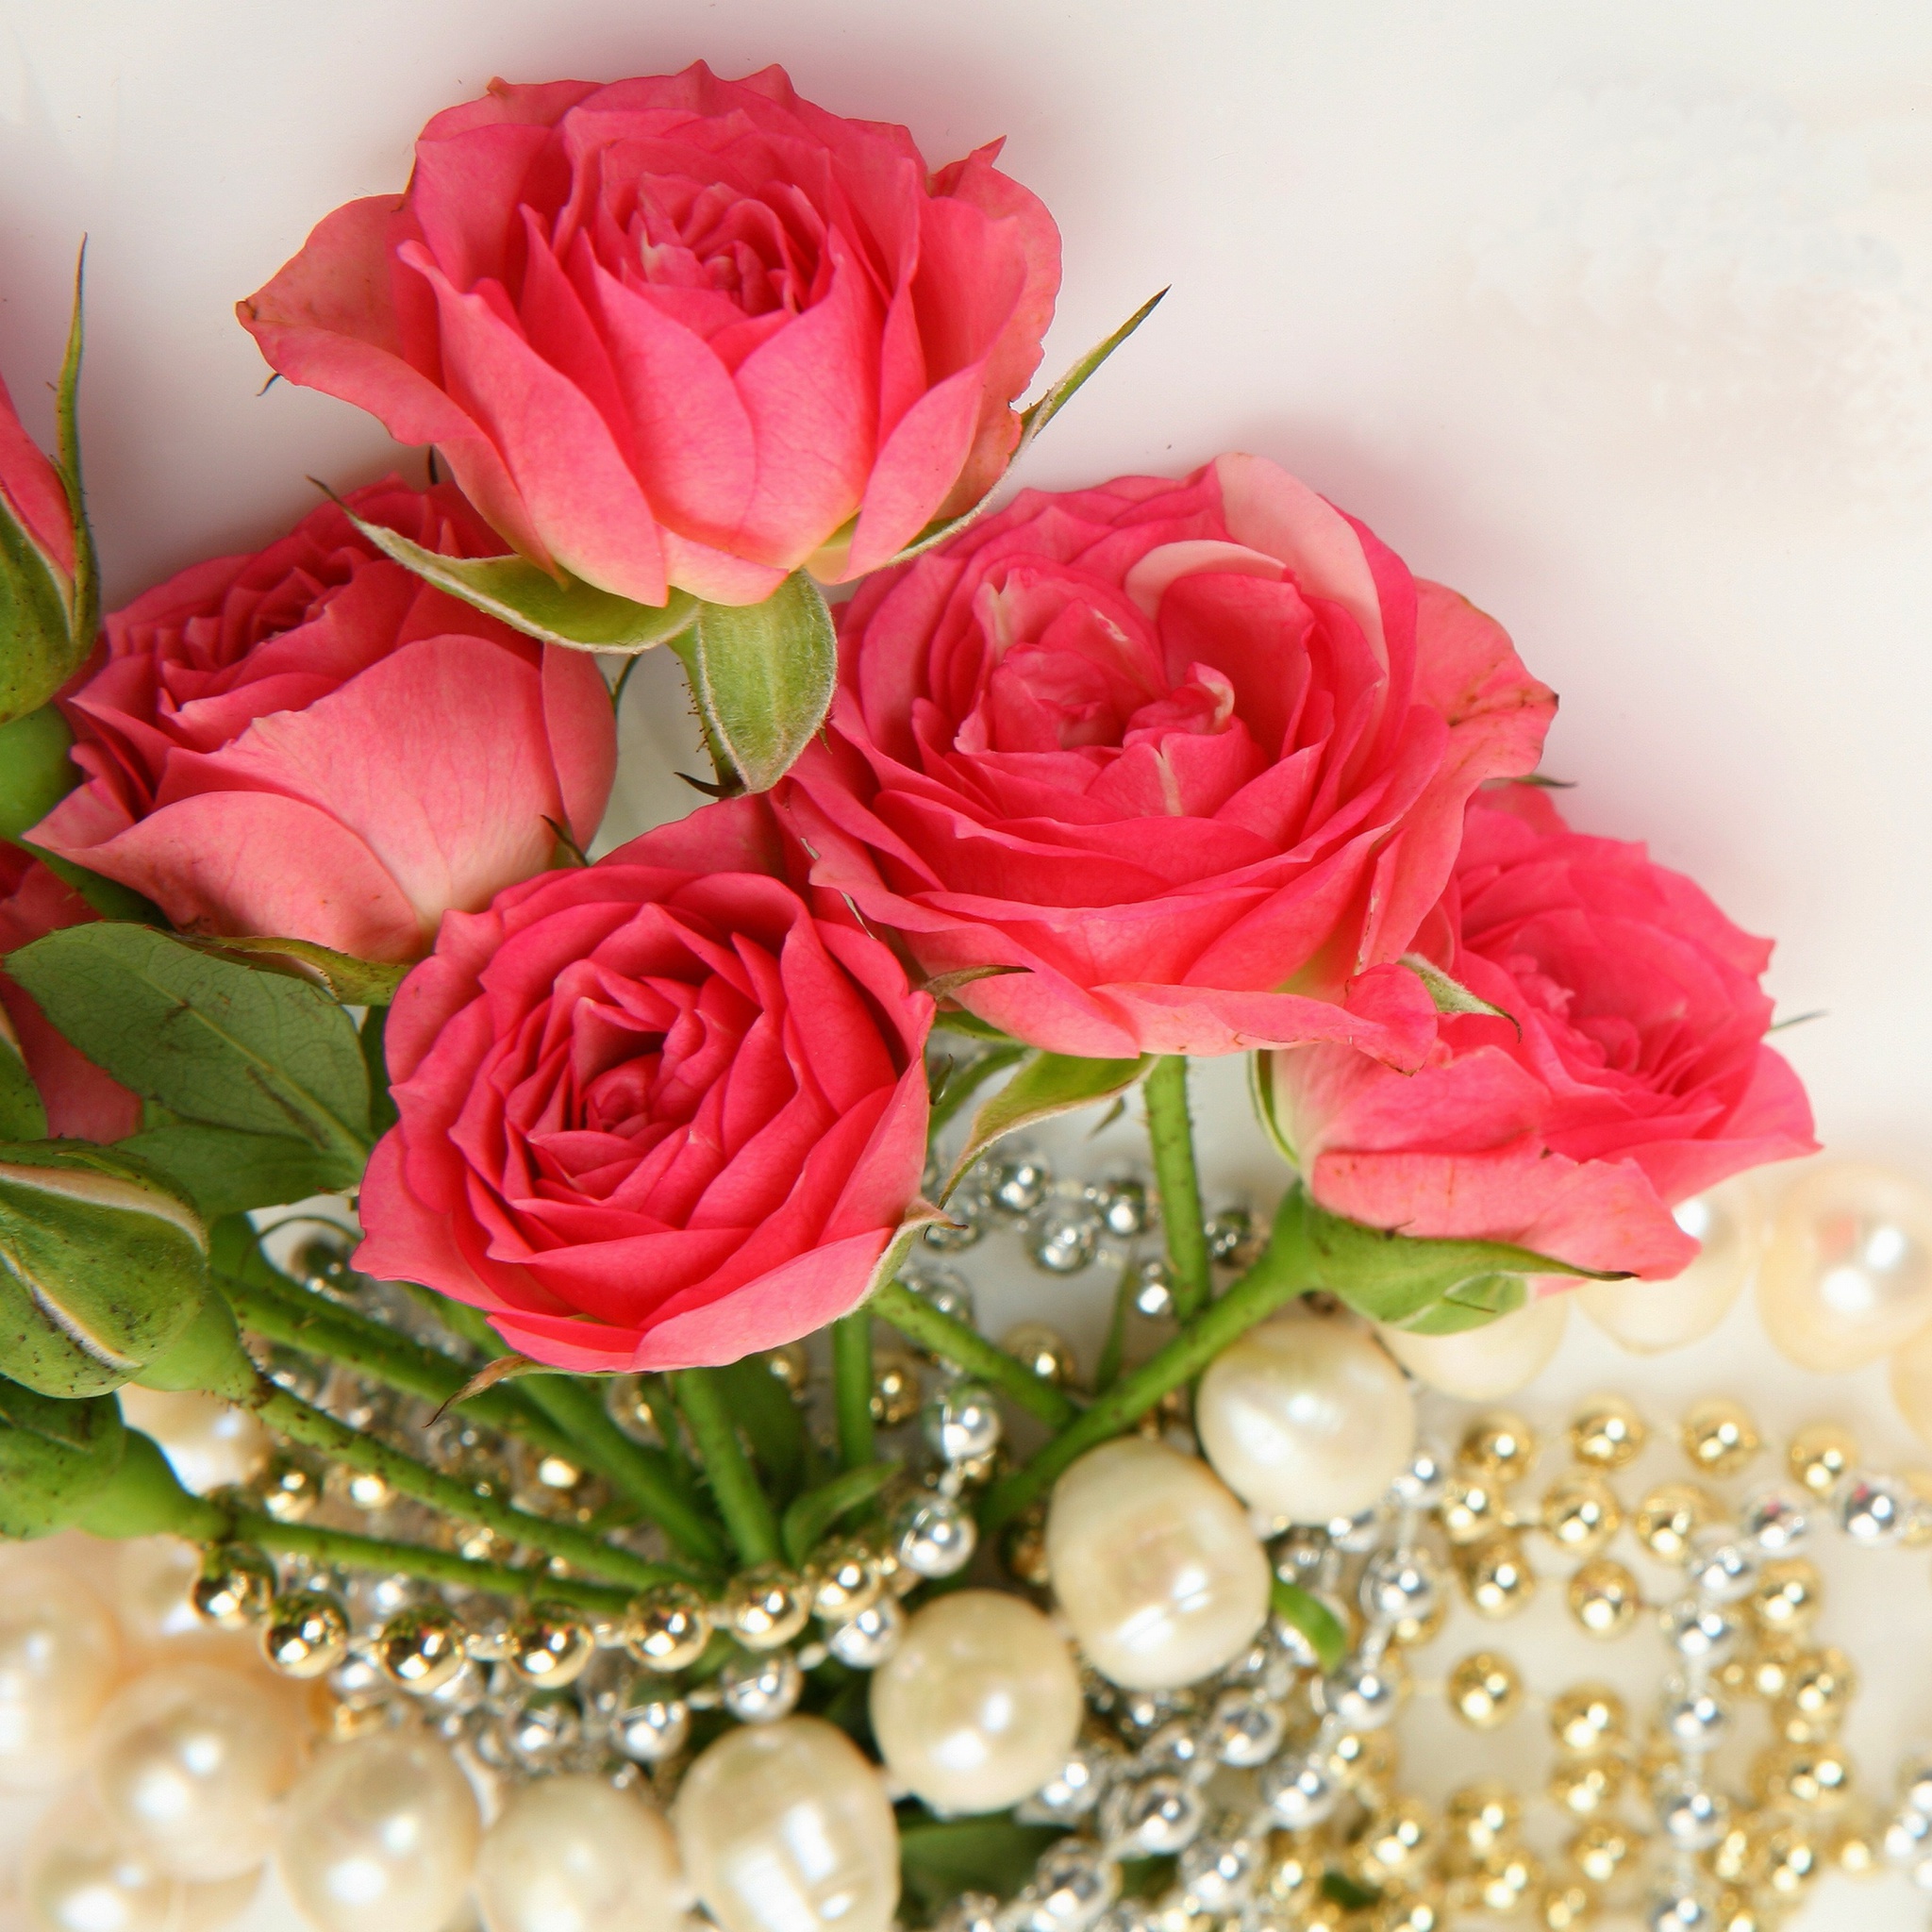 Necklace and Roses Bouquet screenshot #1 2048x2048